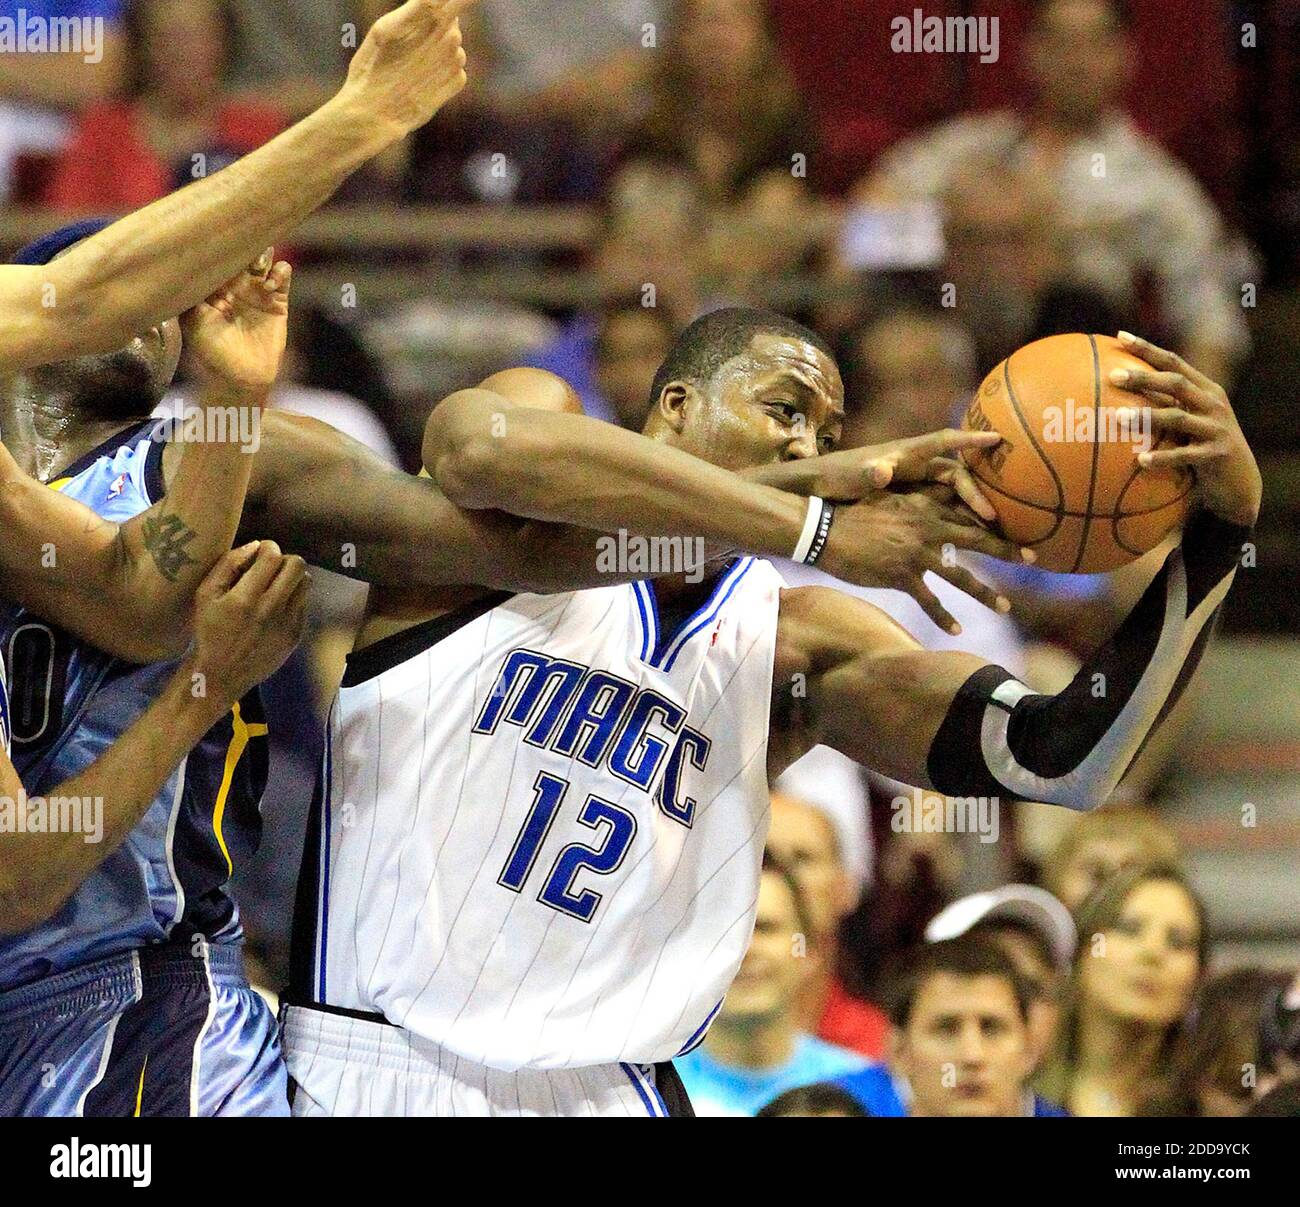 NO FILM, NO VIDEO, NO TV, NO DOCUMENTARY - Orlando Magic center Dwight Howard (12) pulls a rebound away from Memphis Grizzlies forward Zach Randolph, left, during an NBA game at Amway Arena in Orlando, FL, USA on April 4, 2010. Photo by Stephen M. Dowell/Orlando Sentinel/MCT/Cameleon/ABACAPRESS.COM Stock Photo